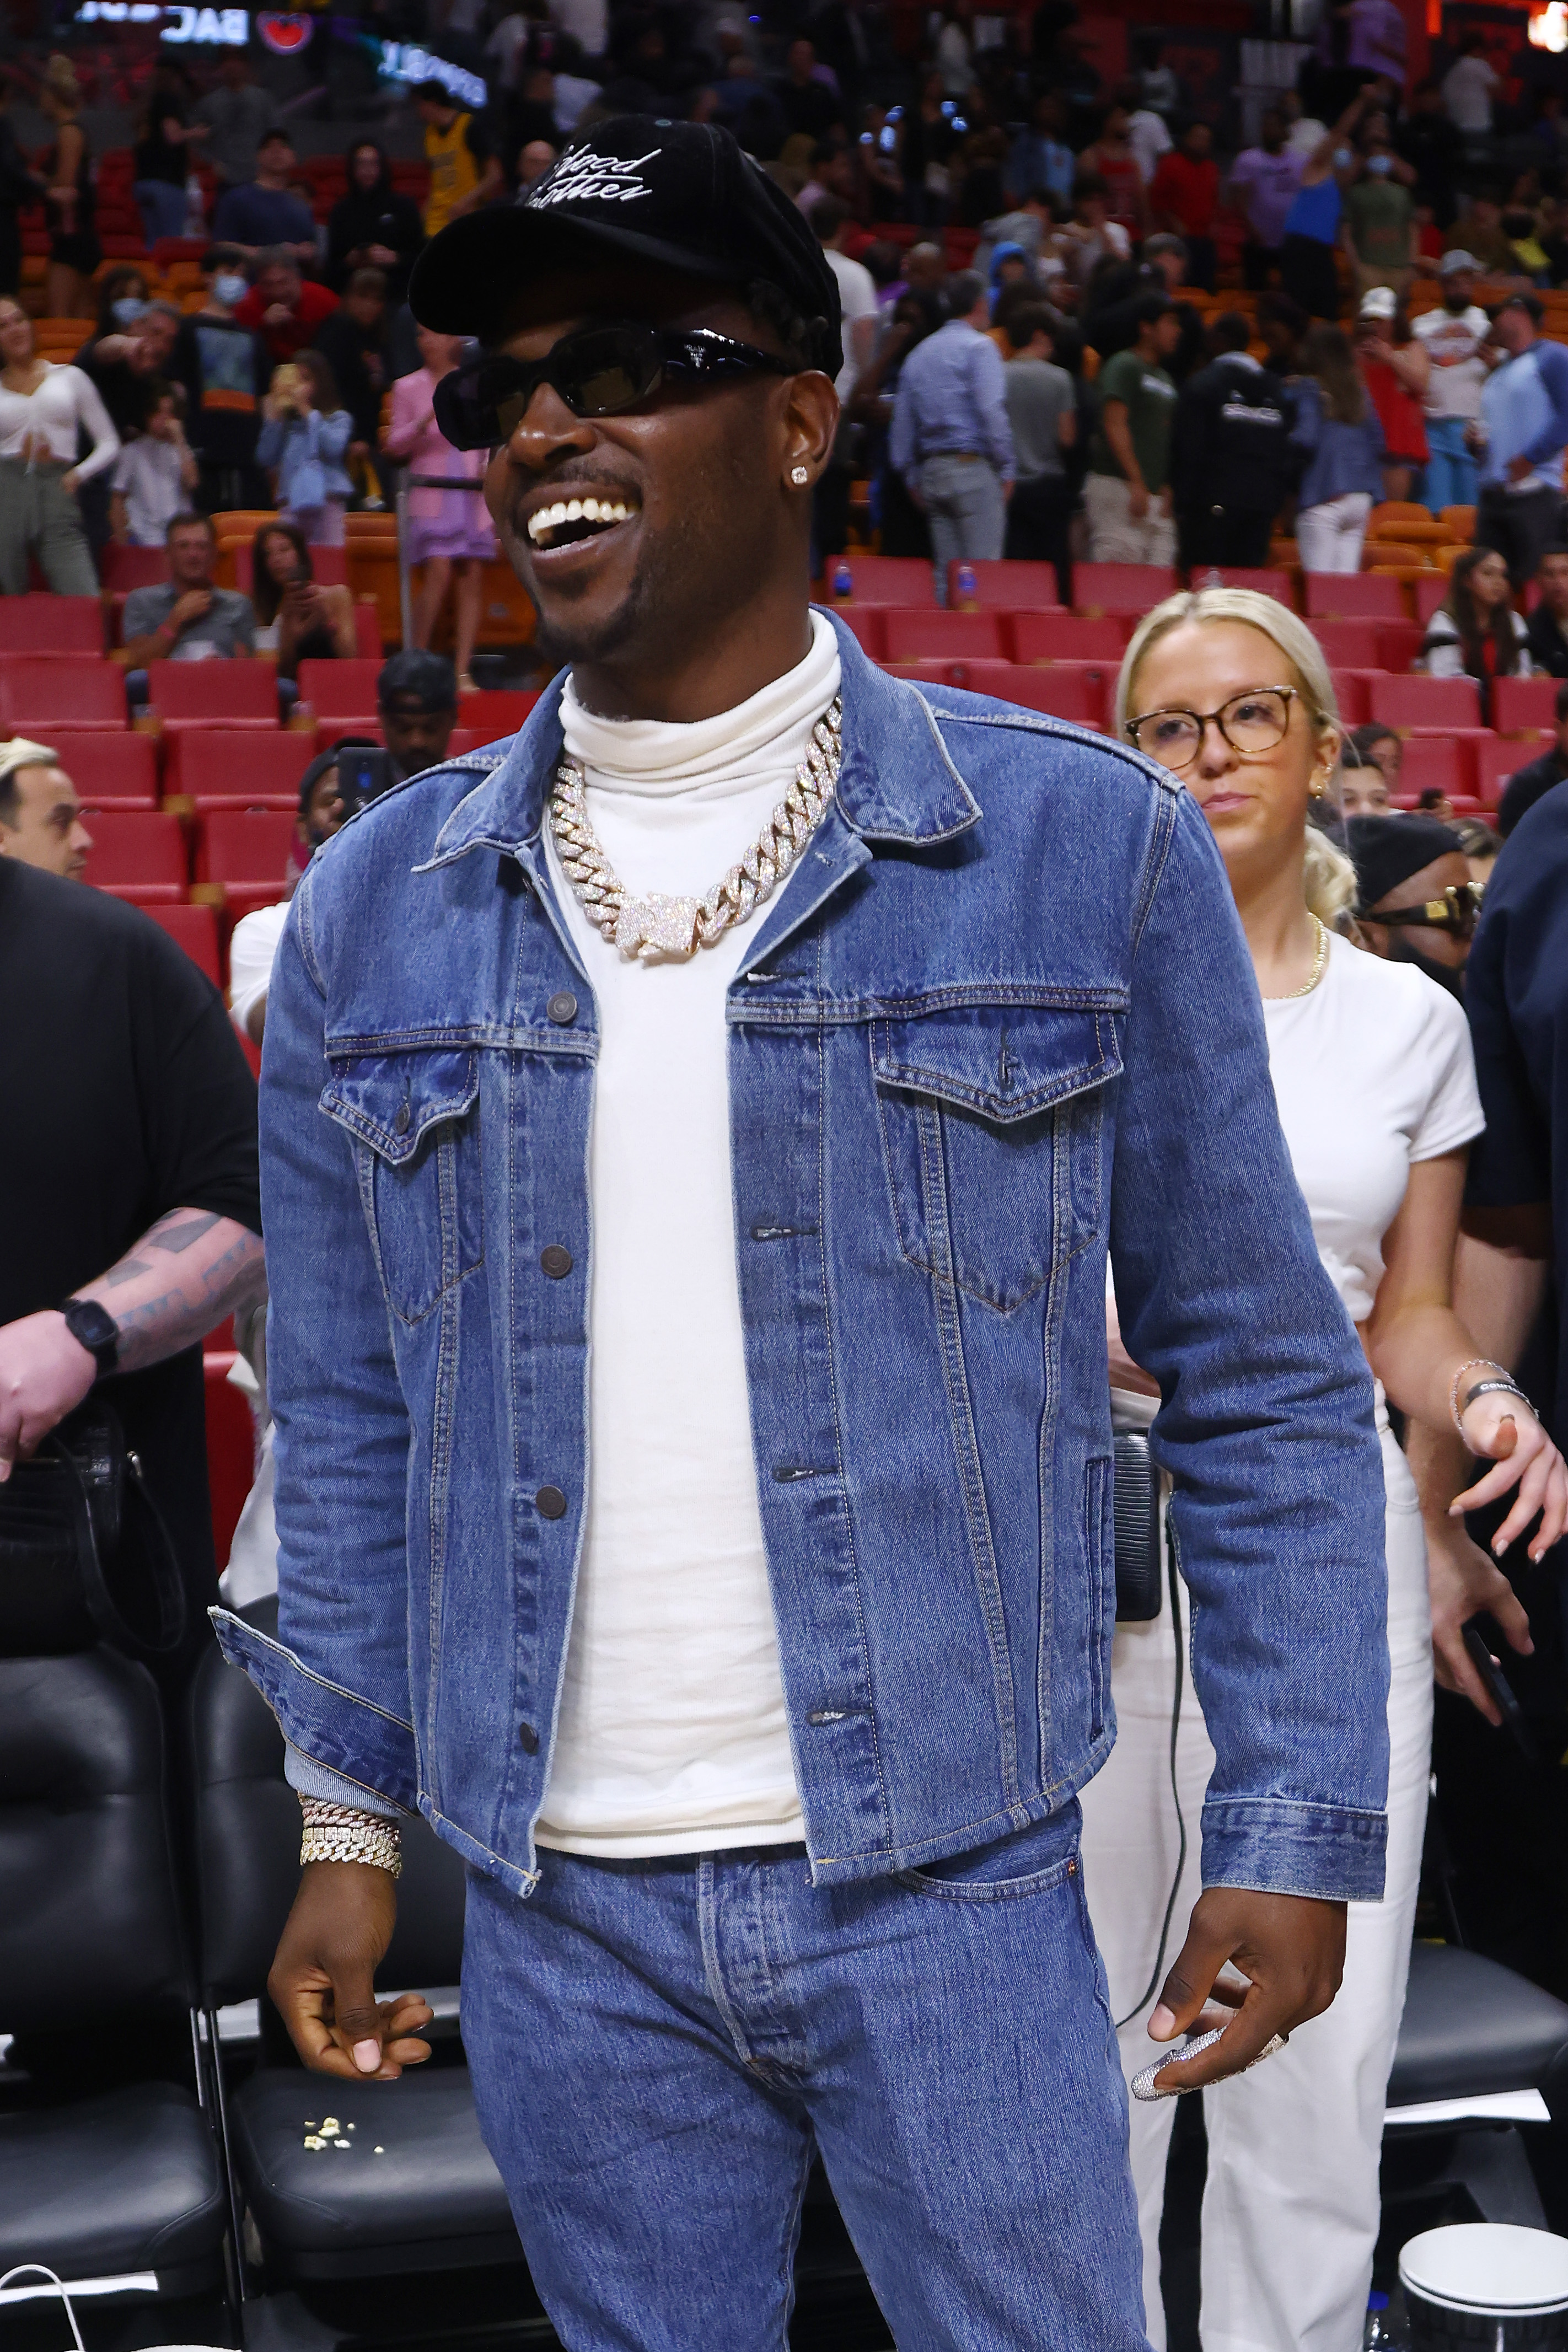 Antonio Brown at the game between the Miami Heat and the Detroit Pistons on March 15, 2022, in Miami, Florida. | Source: Getty Images